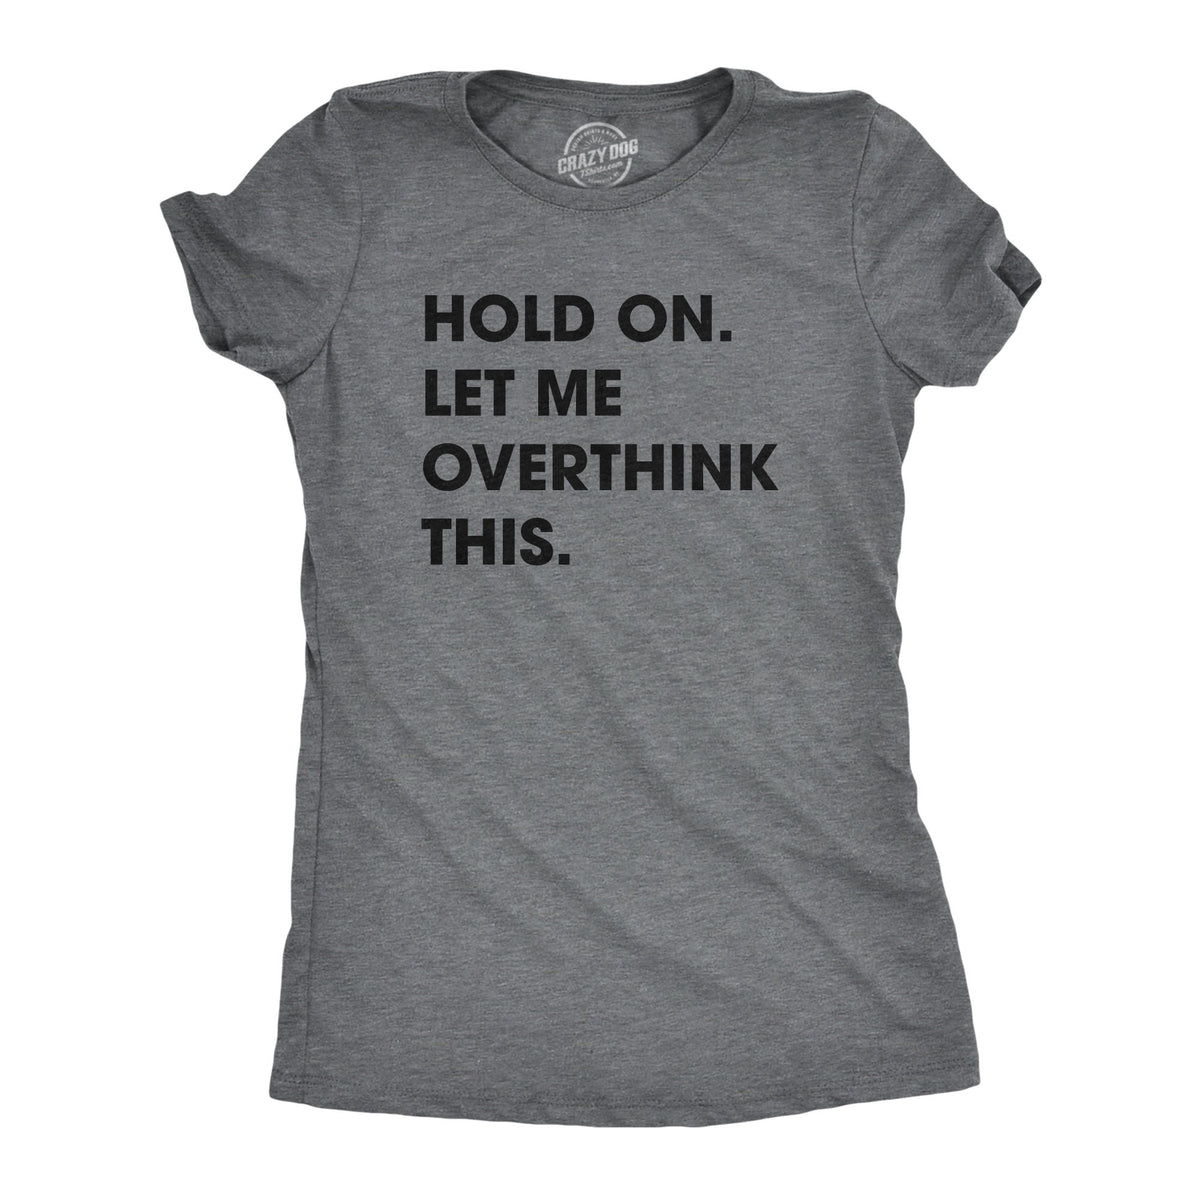 Funny Dark Heather Grey Hold On Let Me Overthink This Womens T Shirt Nerdy Introvert Tee